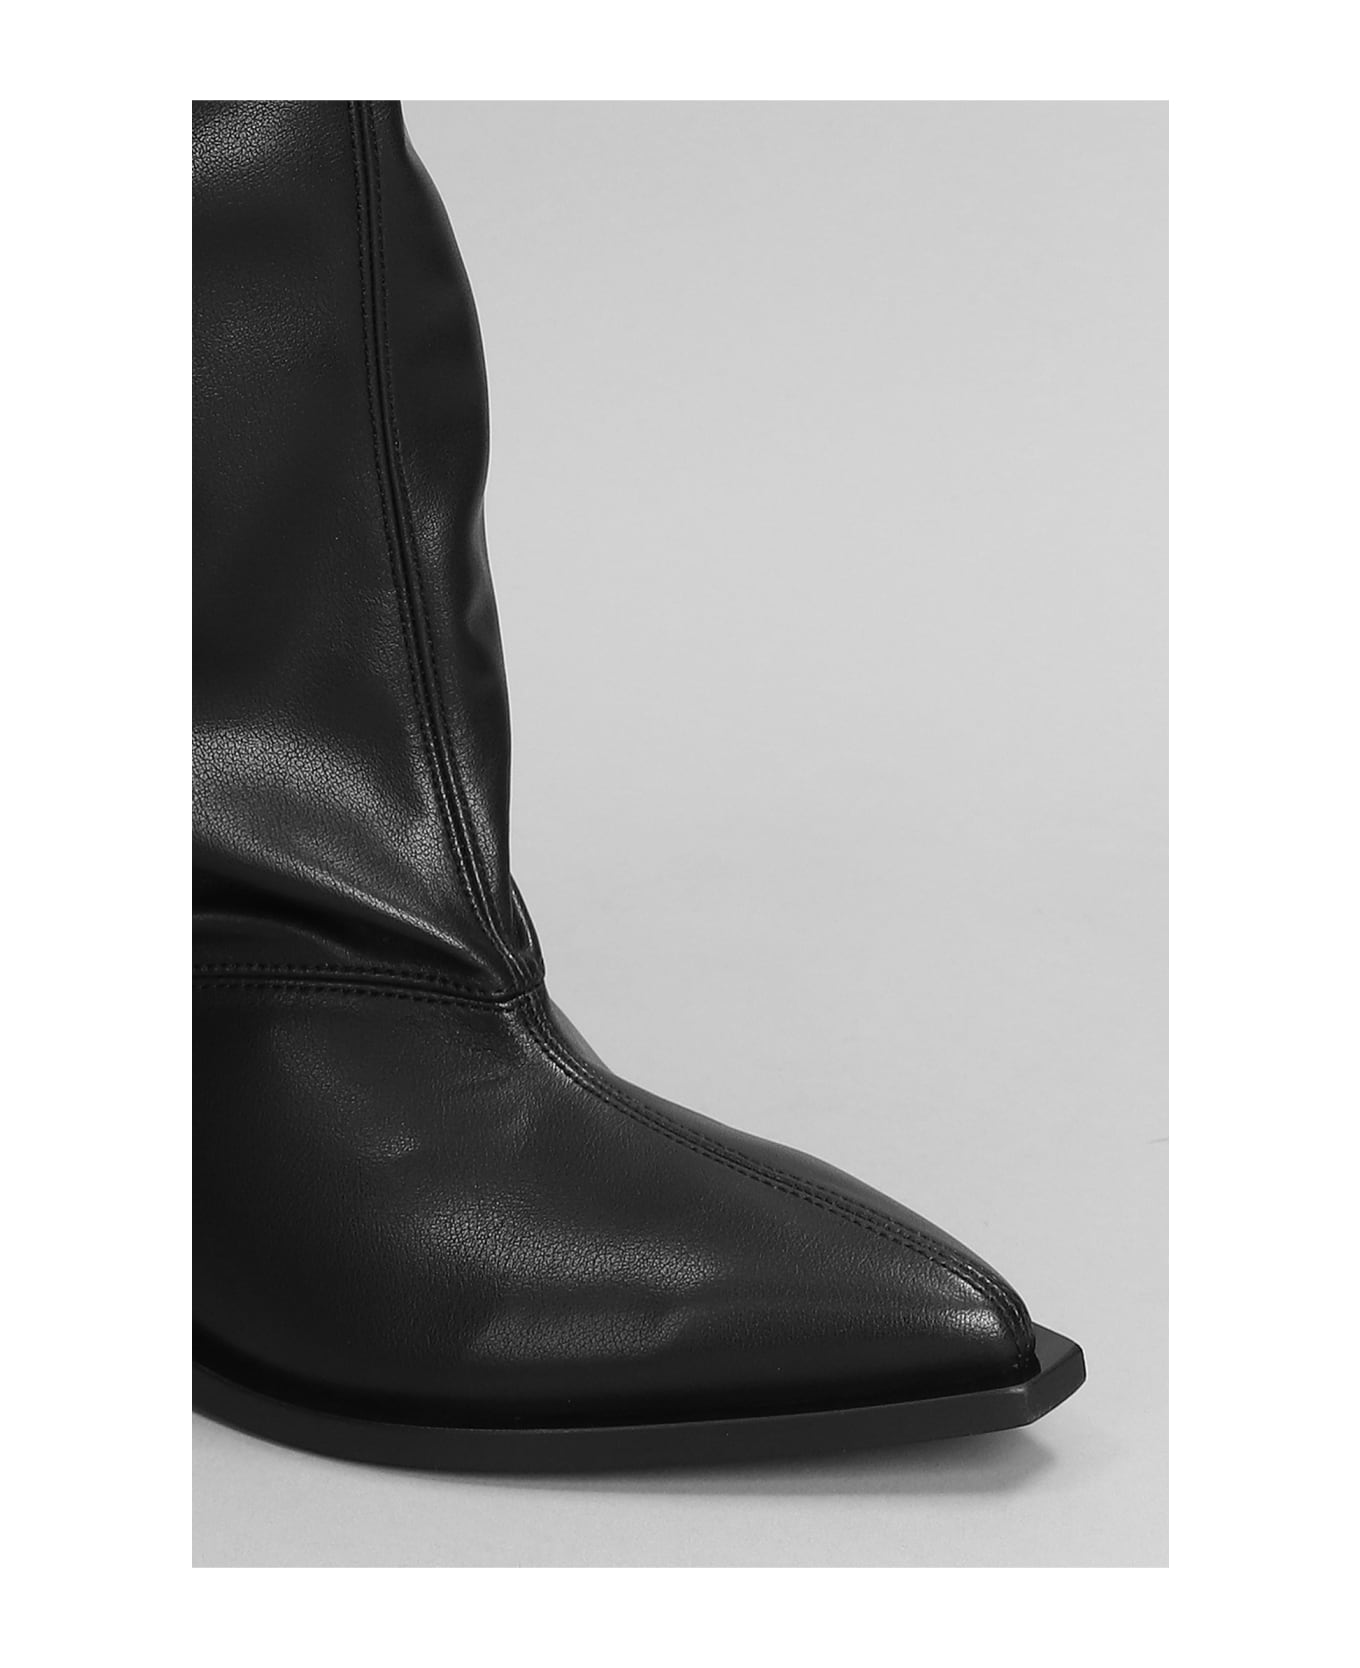 Ganni Low Heels Boots In Black Leather - black